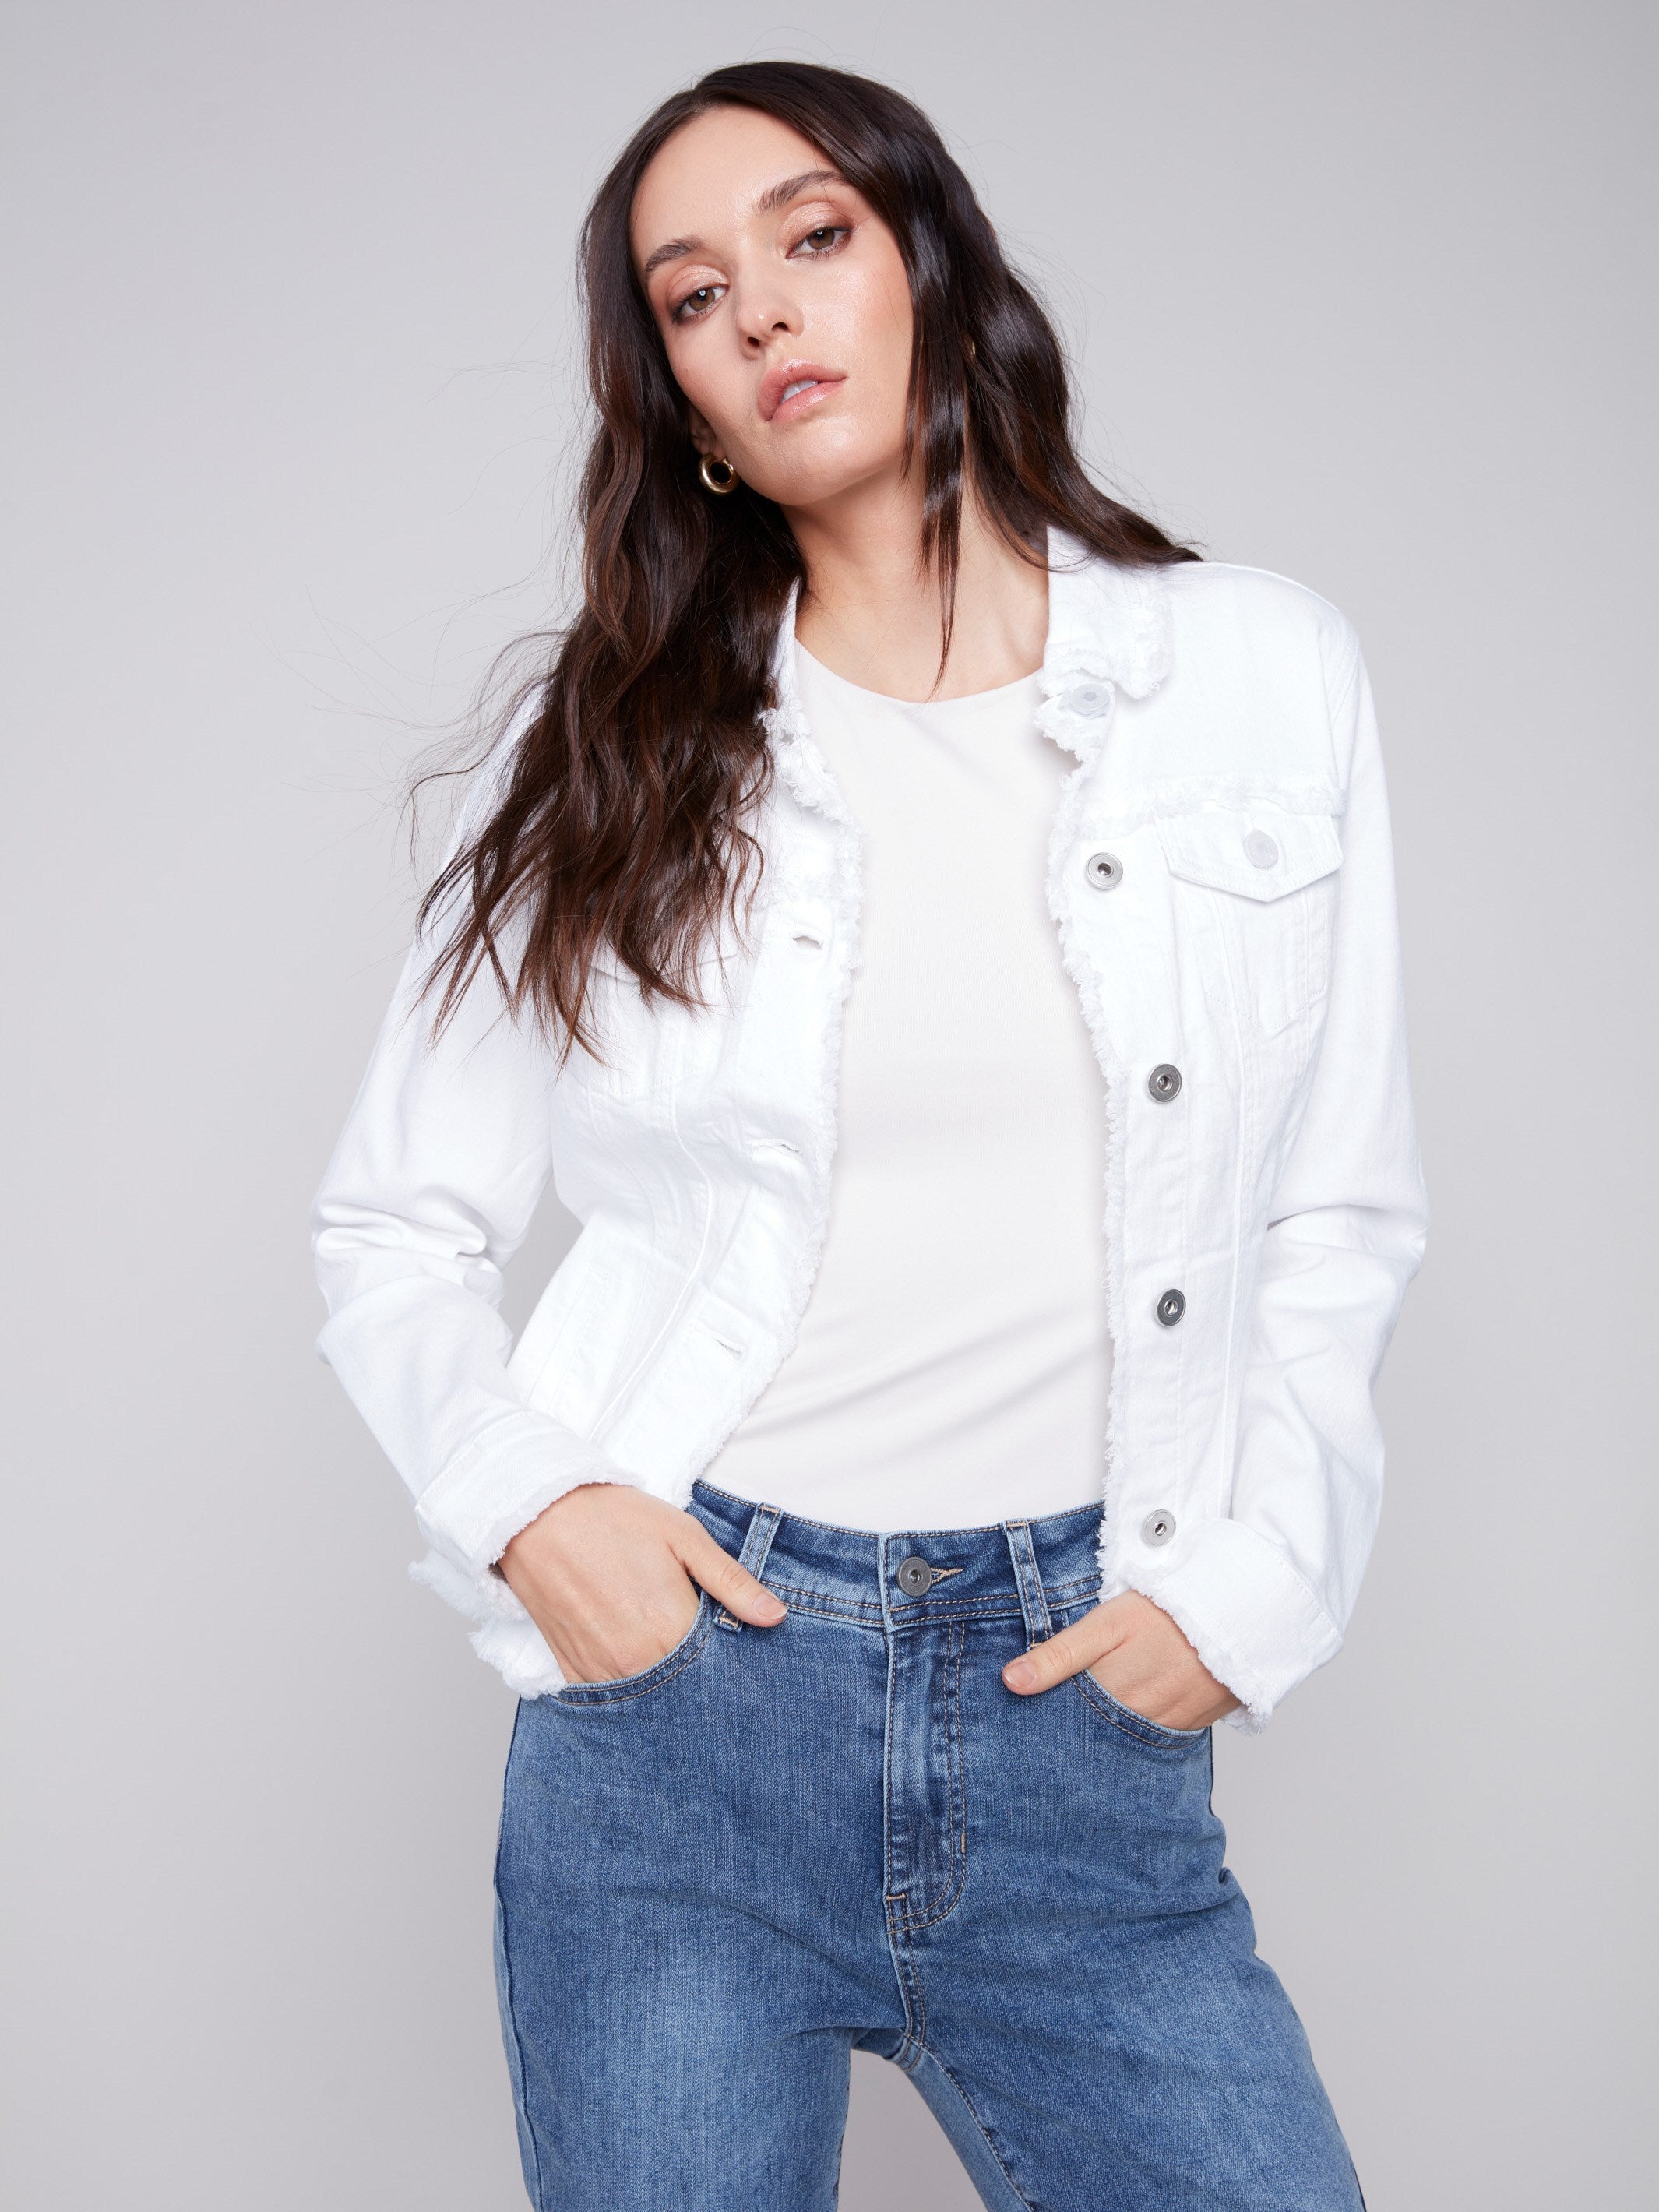 Charlie B Twill Jean Jacket with Frayed Edges - White - Image 1